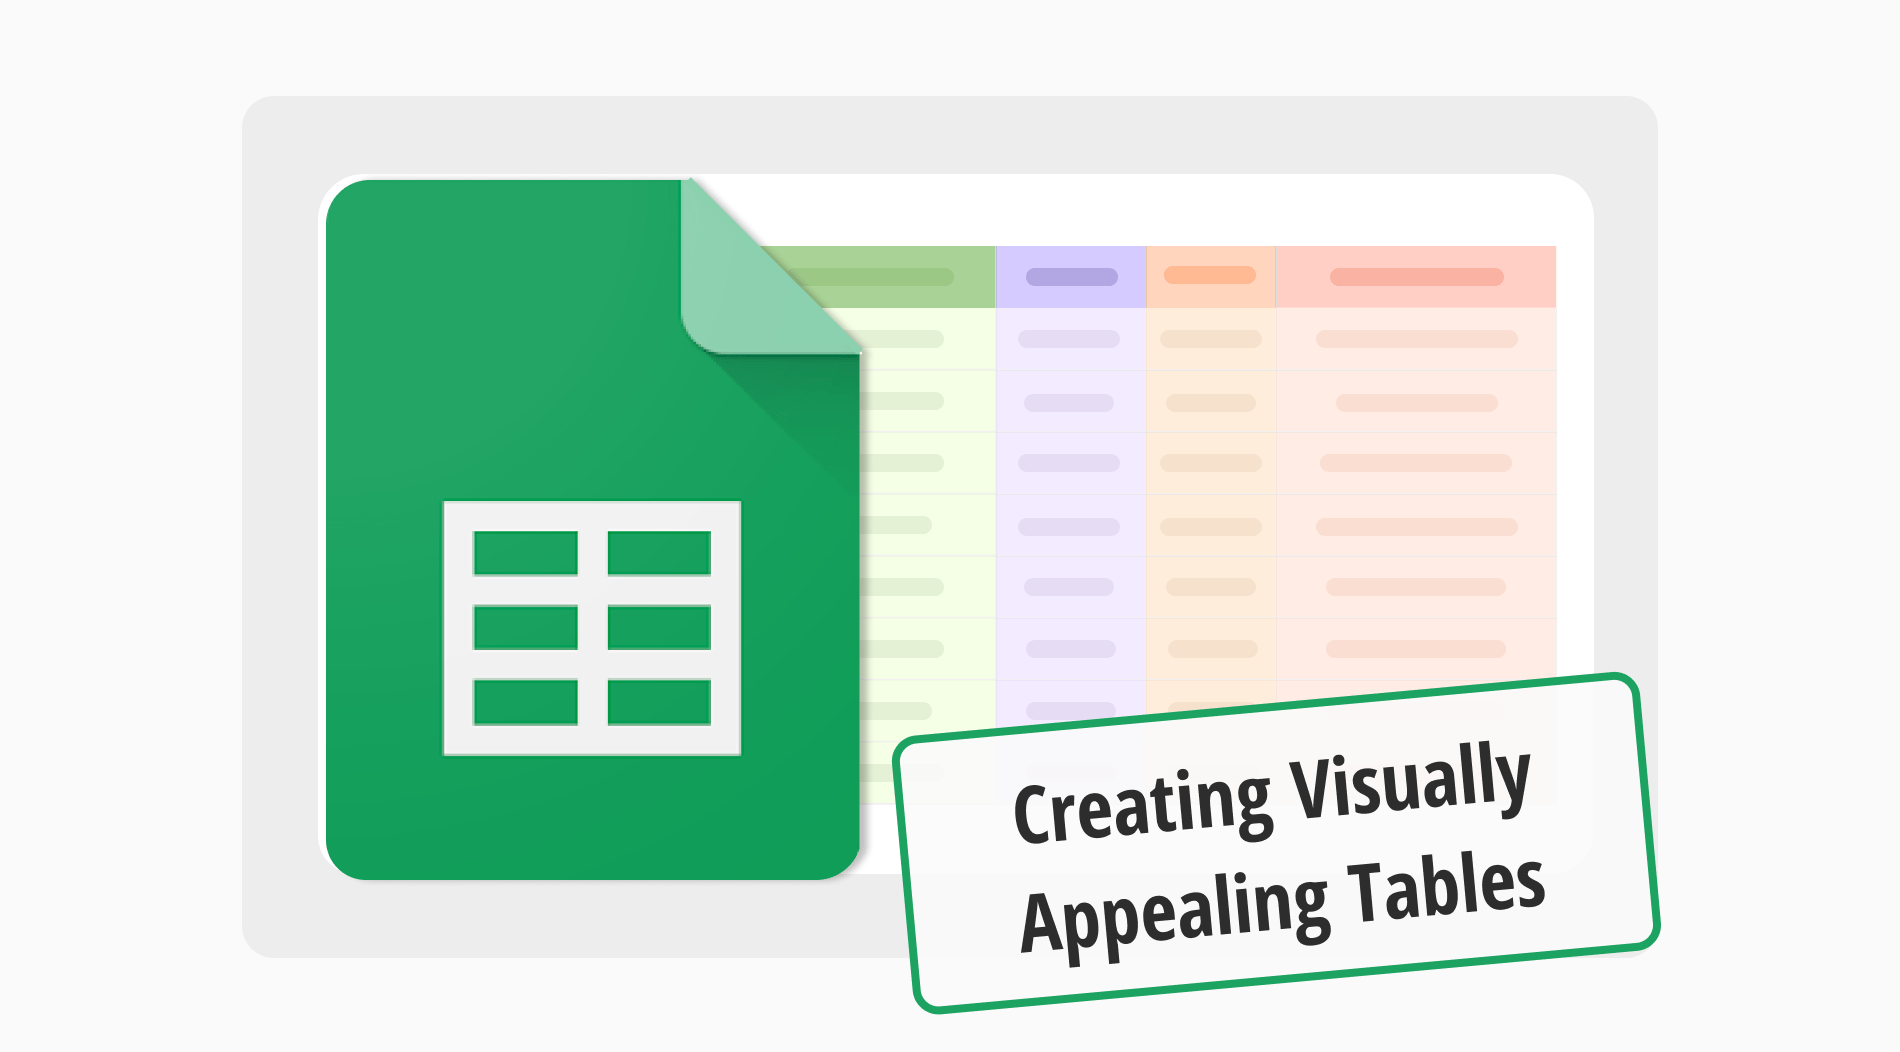 How to create visually appealing tables in Google Sheets